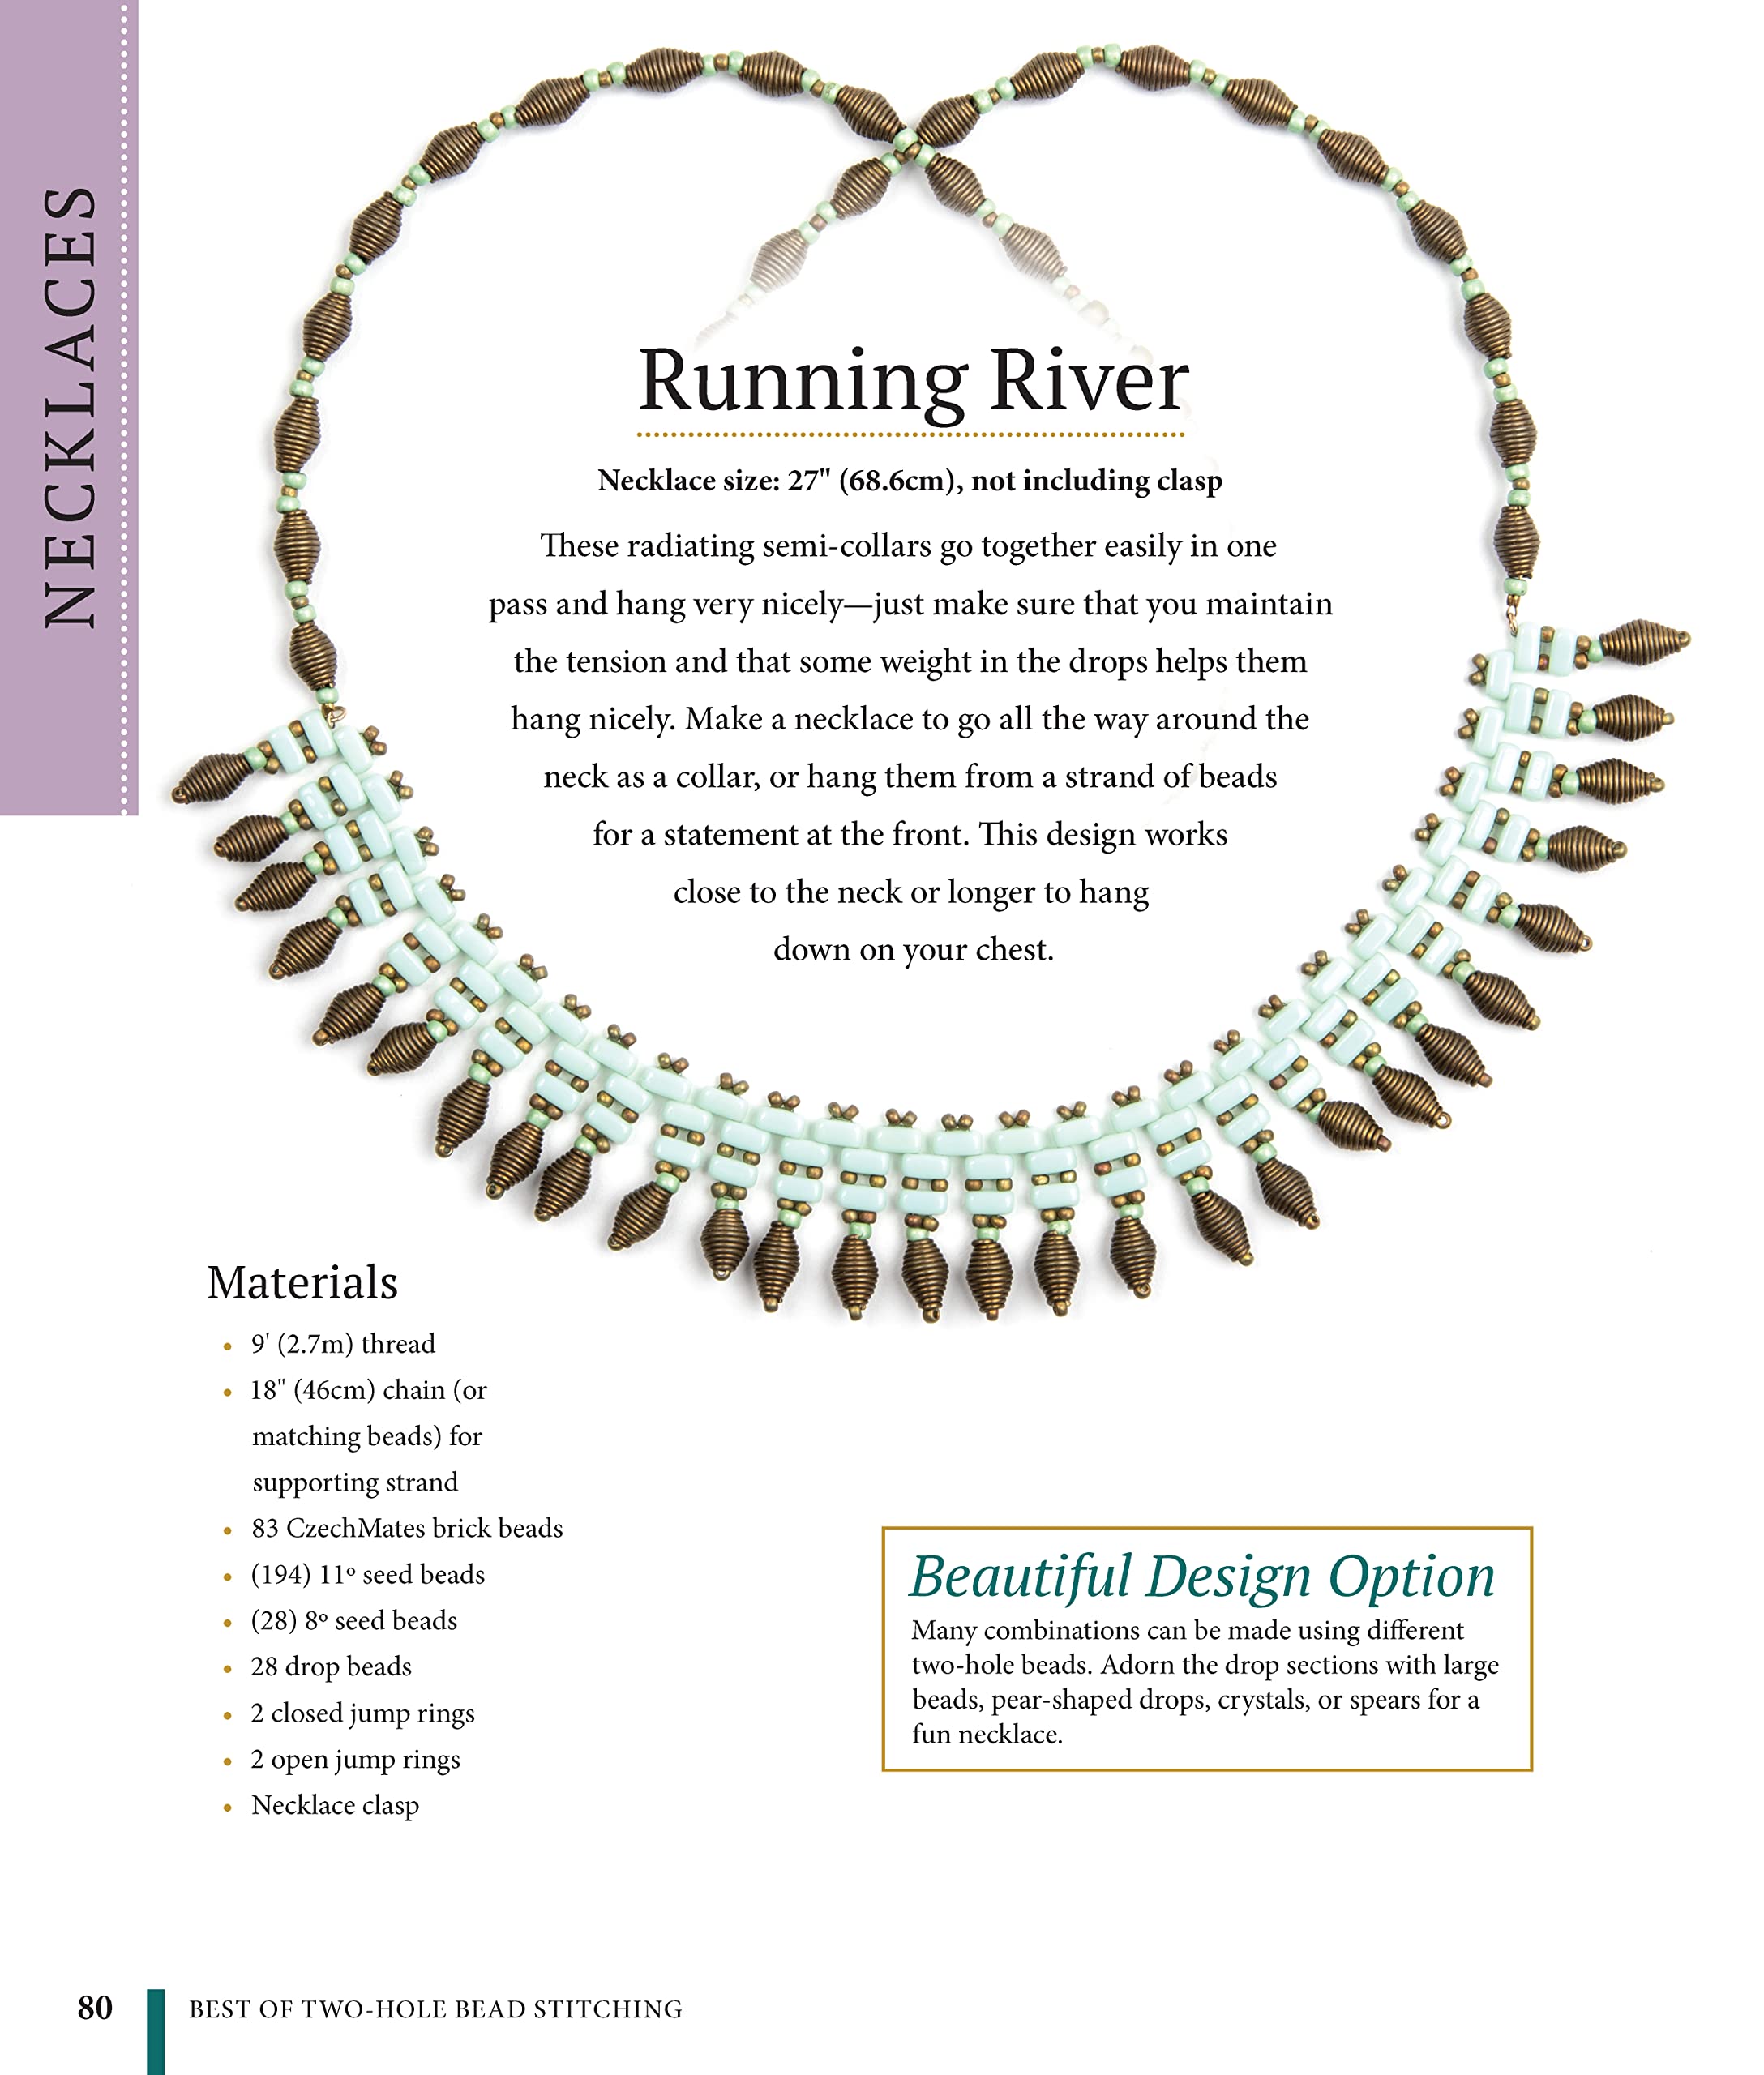 Best of Two-Hole Bead Stitching: Making Beautiful Earrings, Bracelets, and Necklaces for a Timeless Jewelry Wardrobe (Fox Chapel Publishing) 38 Step-by-Step Projects for Beaded Jewelry-Making